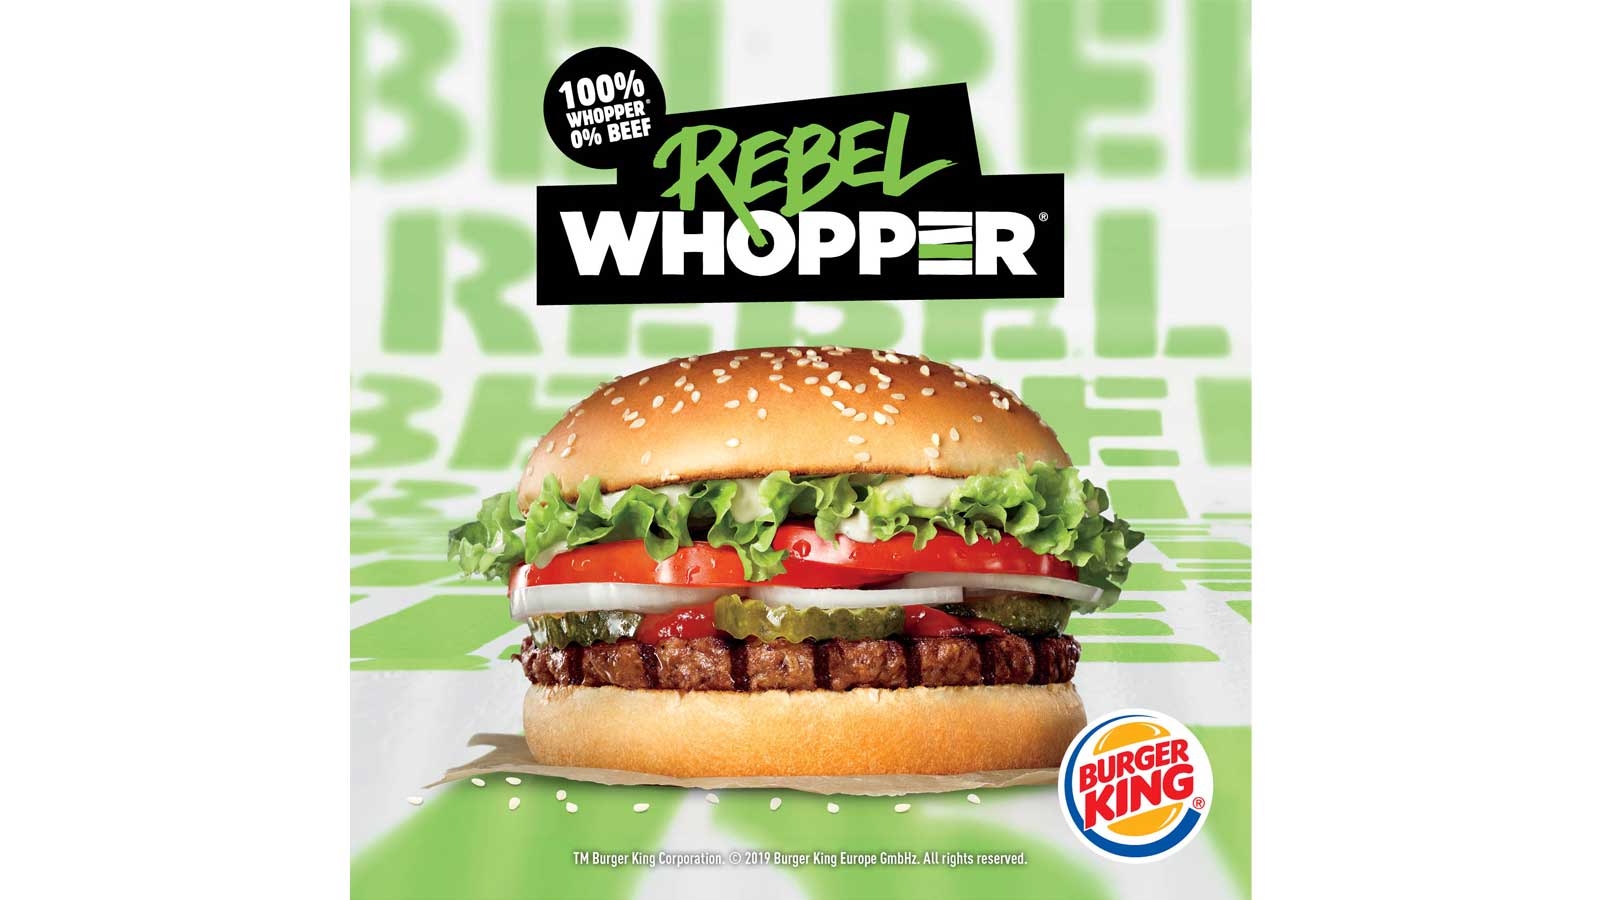 Burger King unveils the Rebel Whopper: 100% Whopper, 0% Beef 